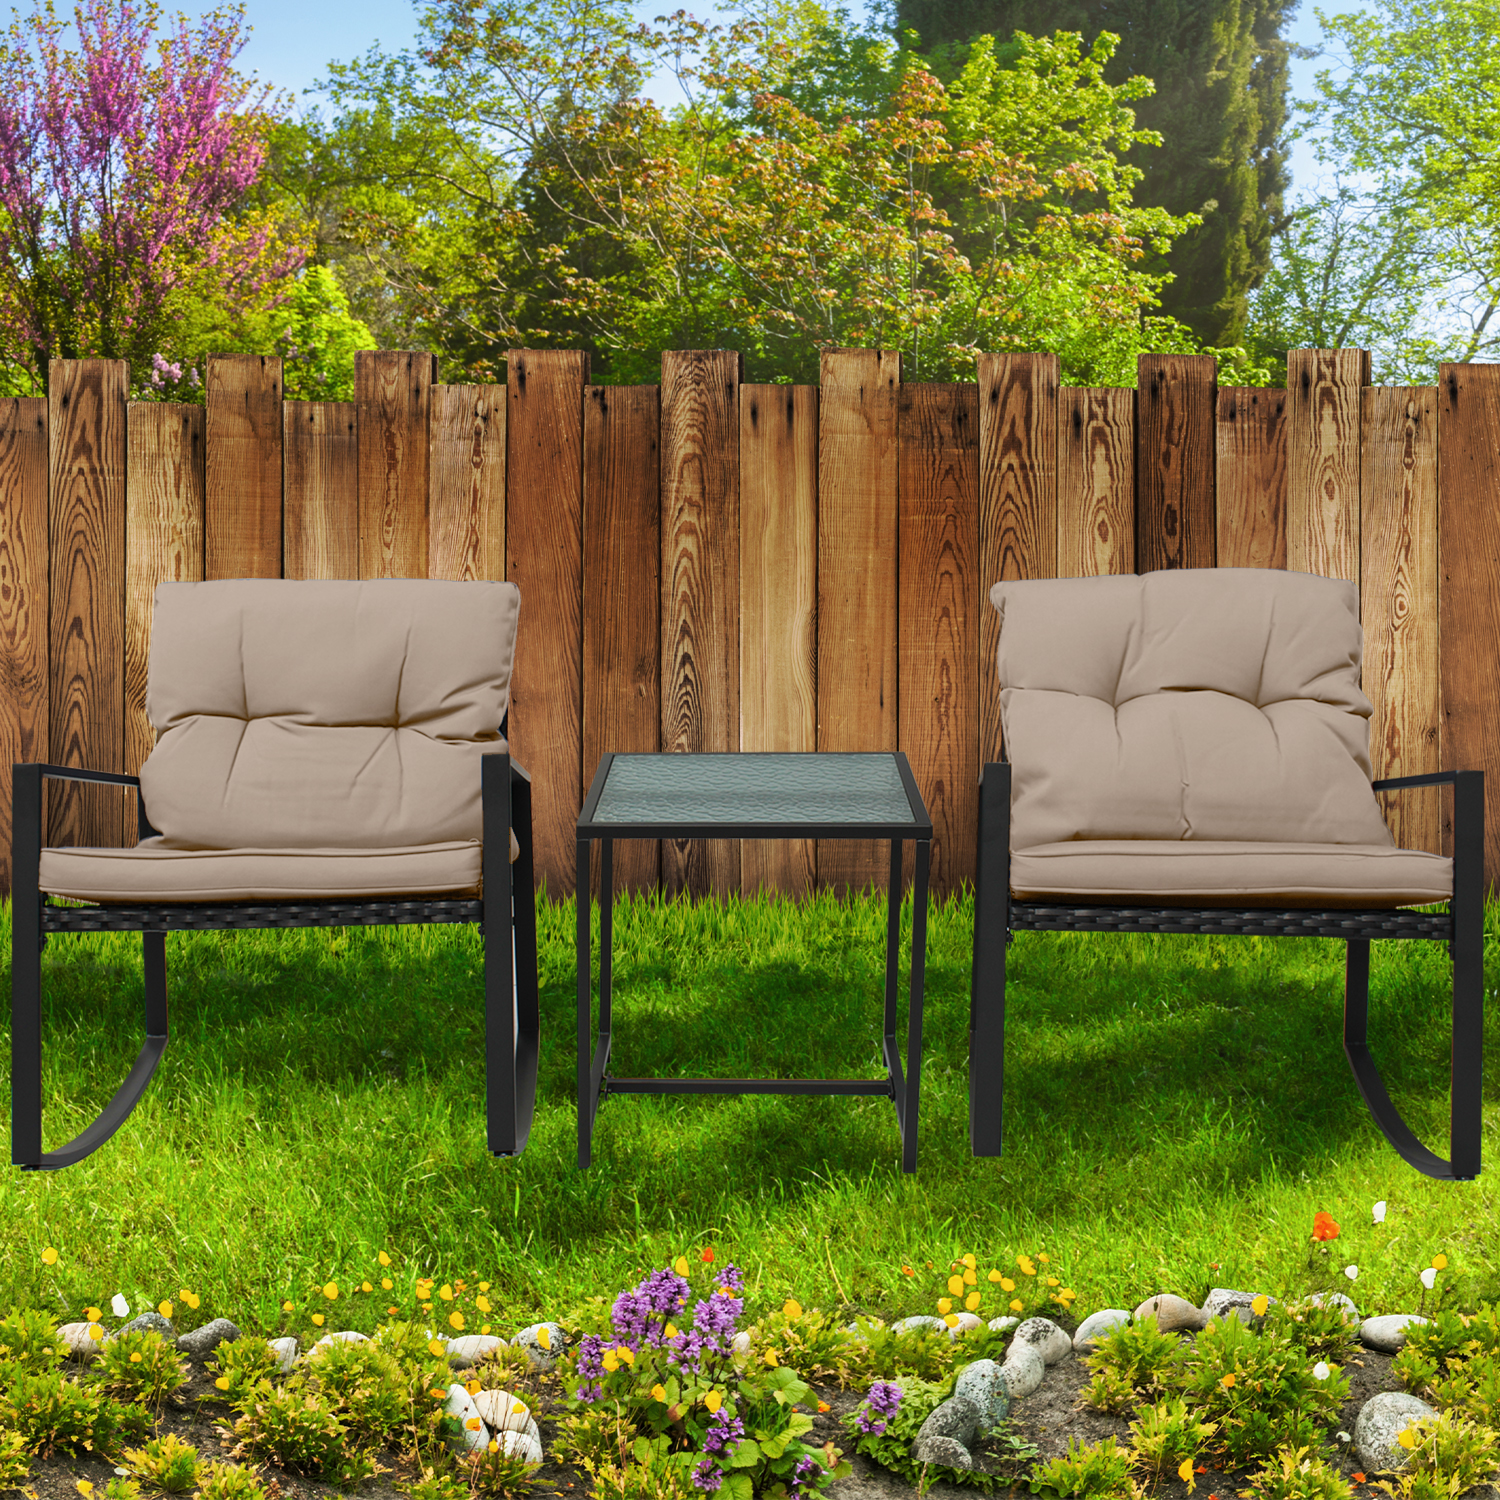 Patio 3-Piece Rocking&nbsp;Rocking Chair Set: Black Wicker Furniture-Two Chairs with Glass&nbsp;occasional&nbsp;Table - image 4 of 7